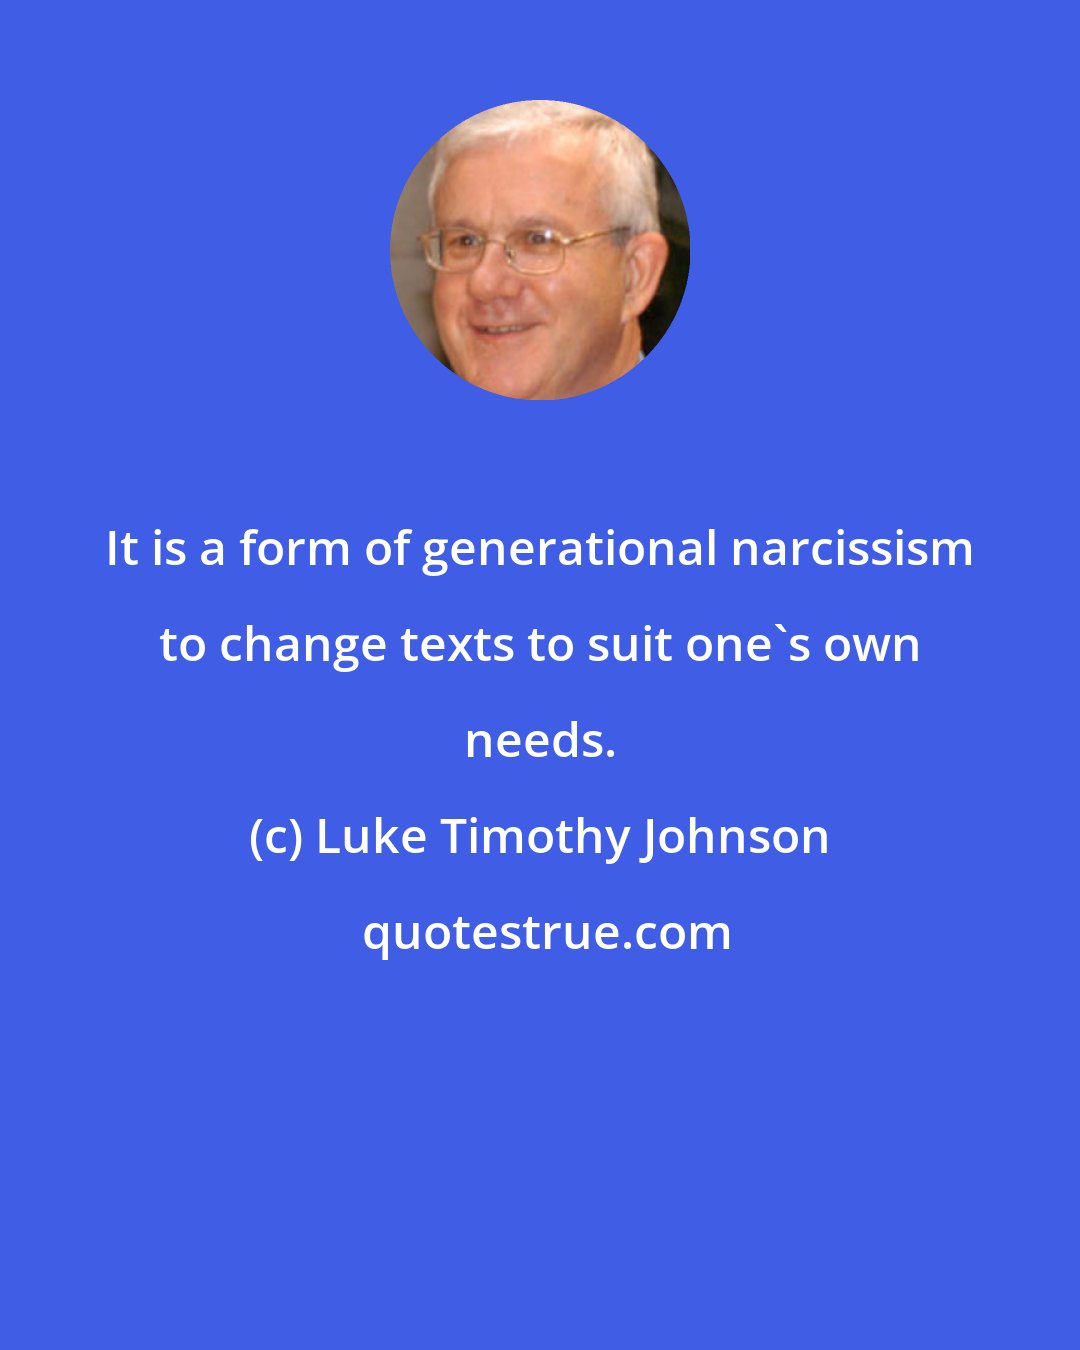 Luke Timothy Johnson: It is a form of generational narcissism to change texts to suit one's own needs.